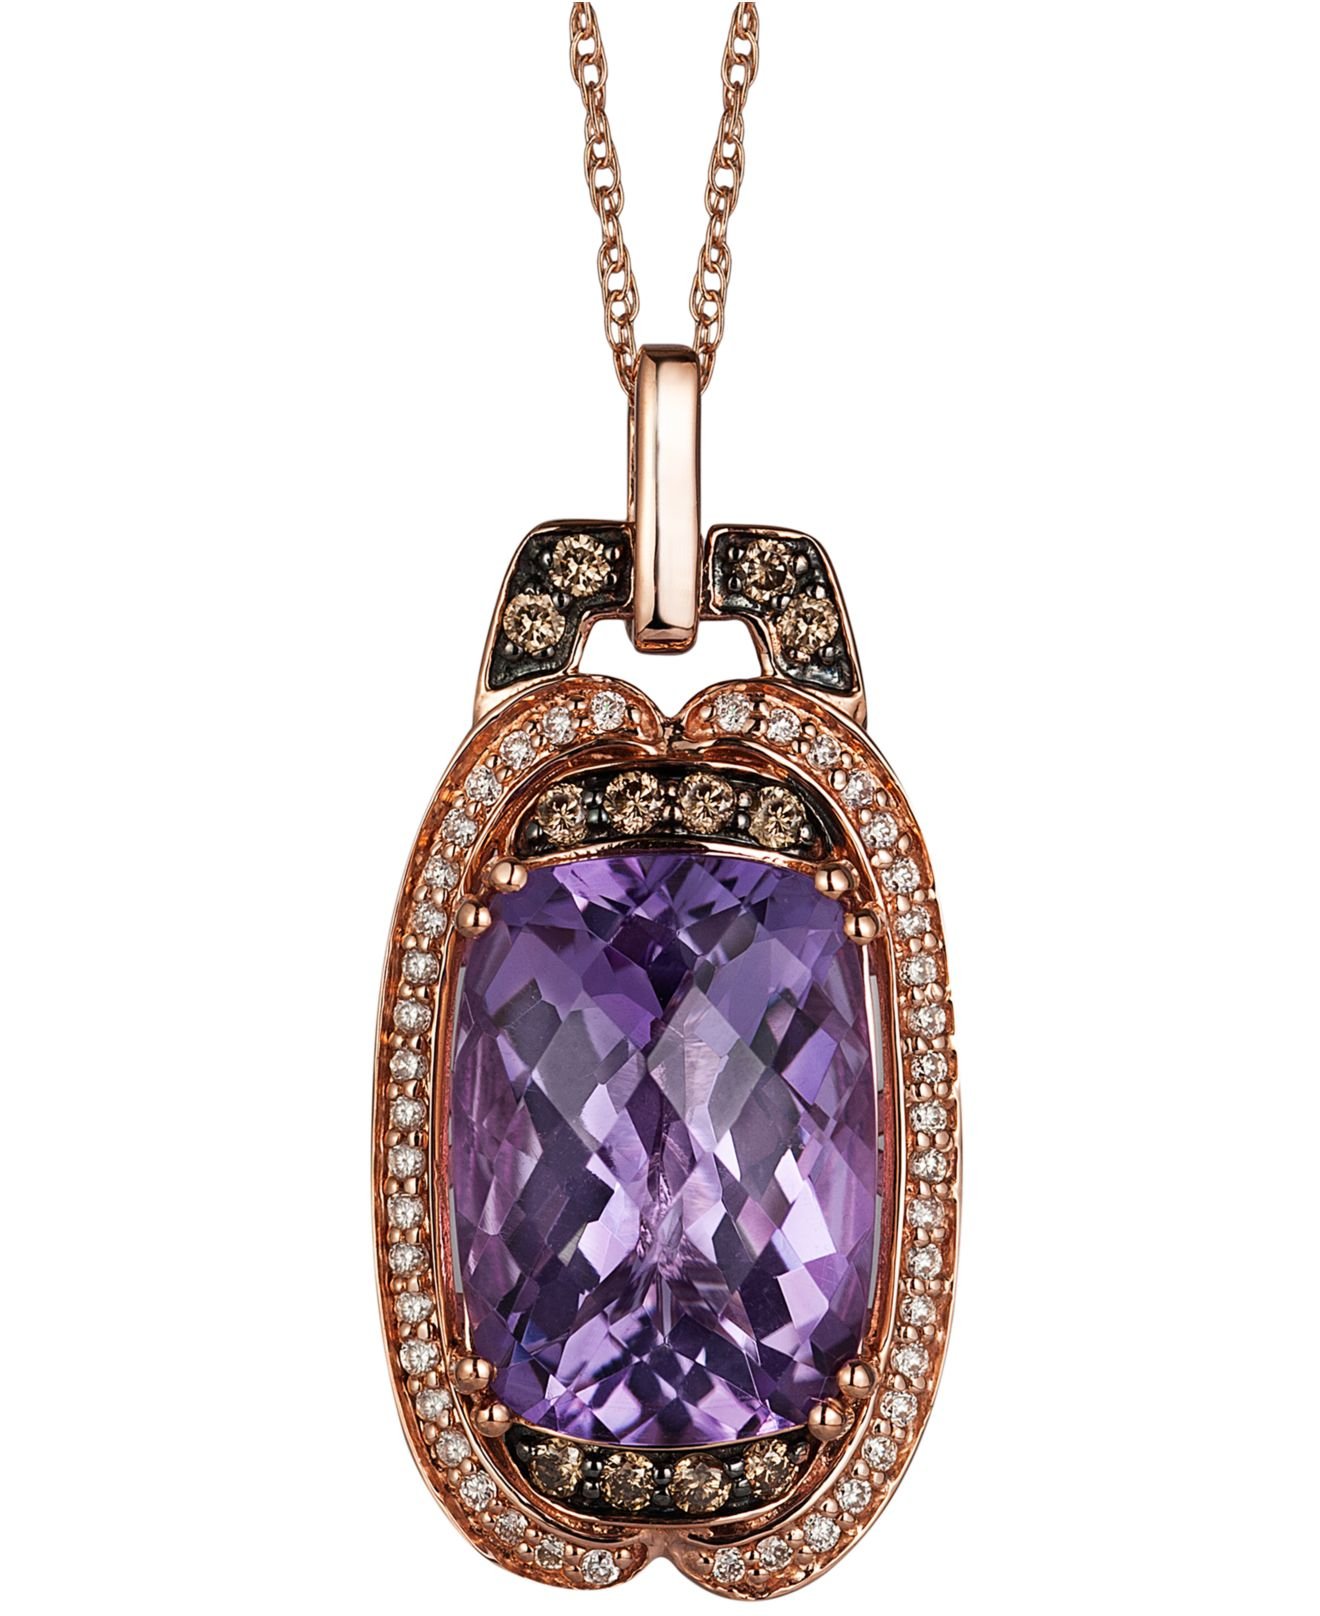 Le Vian White (1/8 Ct. T.W.) And Chocolate (1/6 Ct. T.W.) Diamond Pendant Necklace In 14K Rose